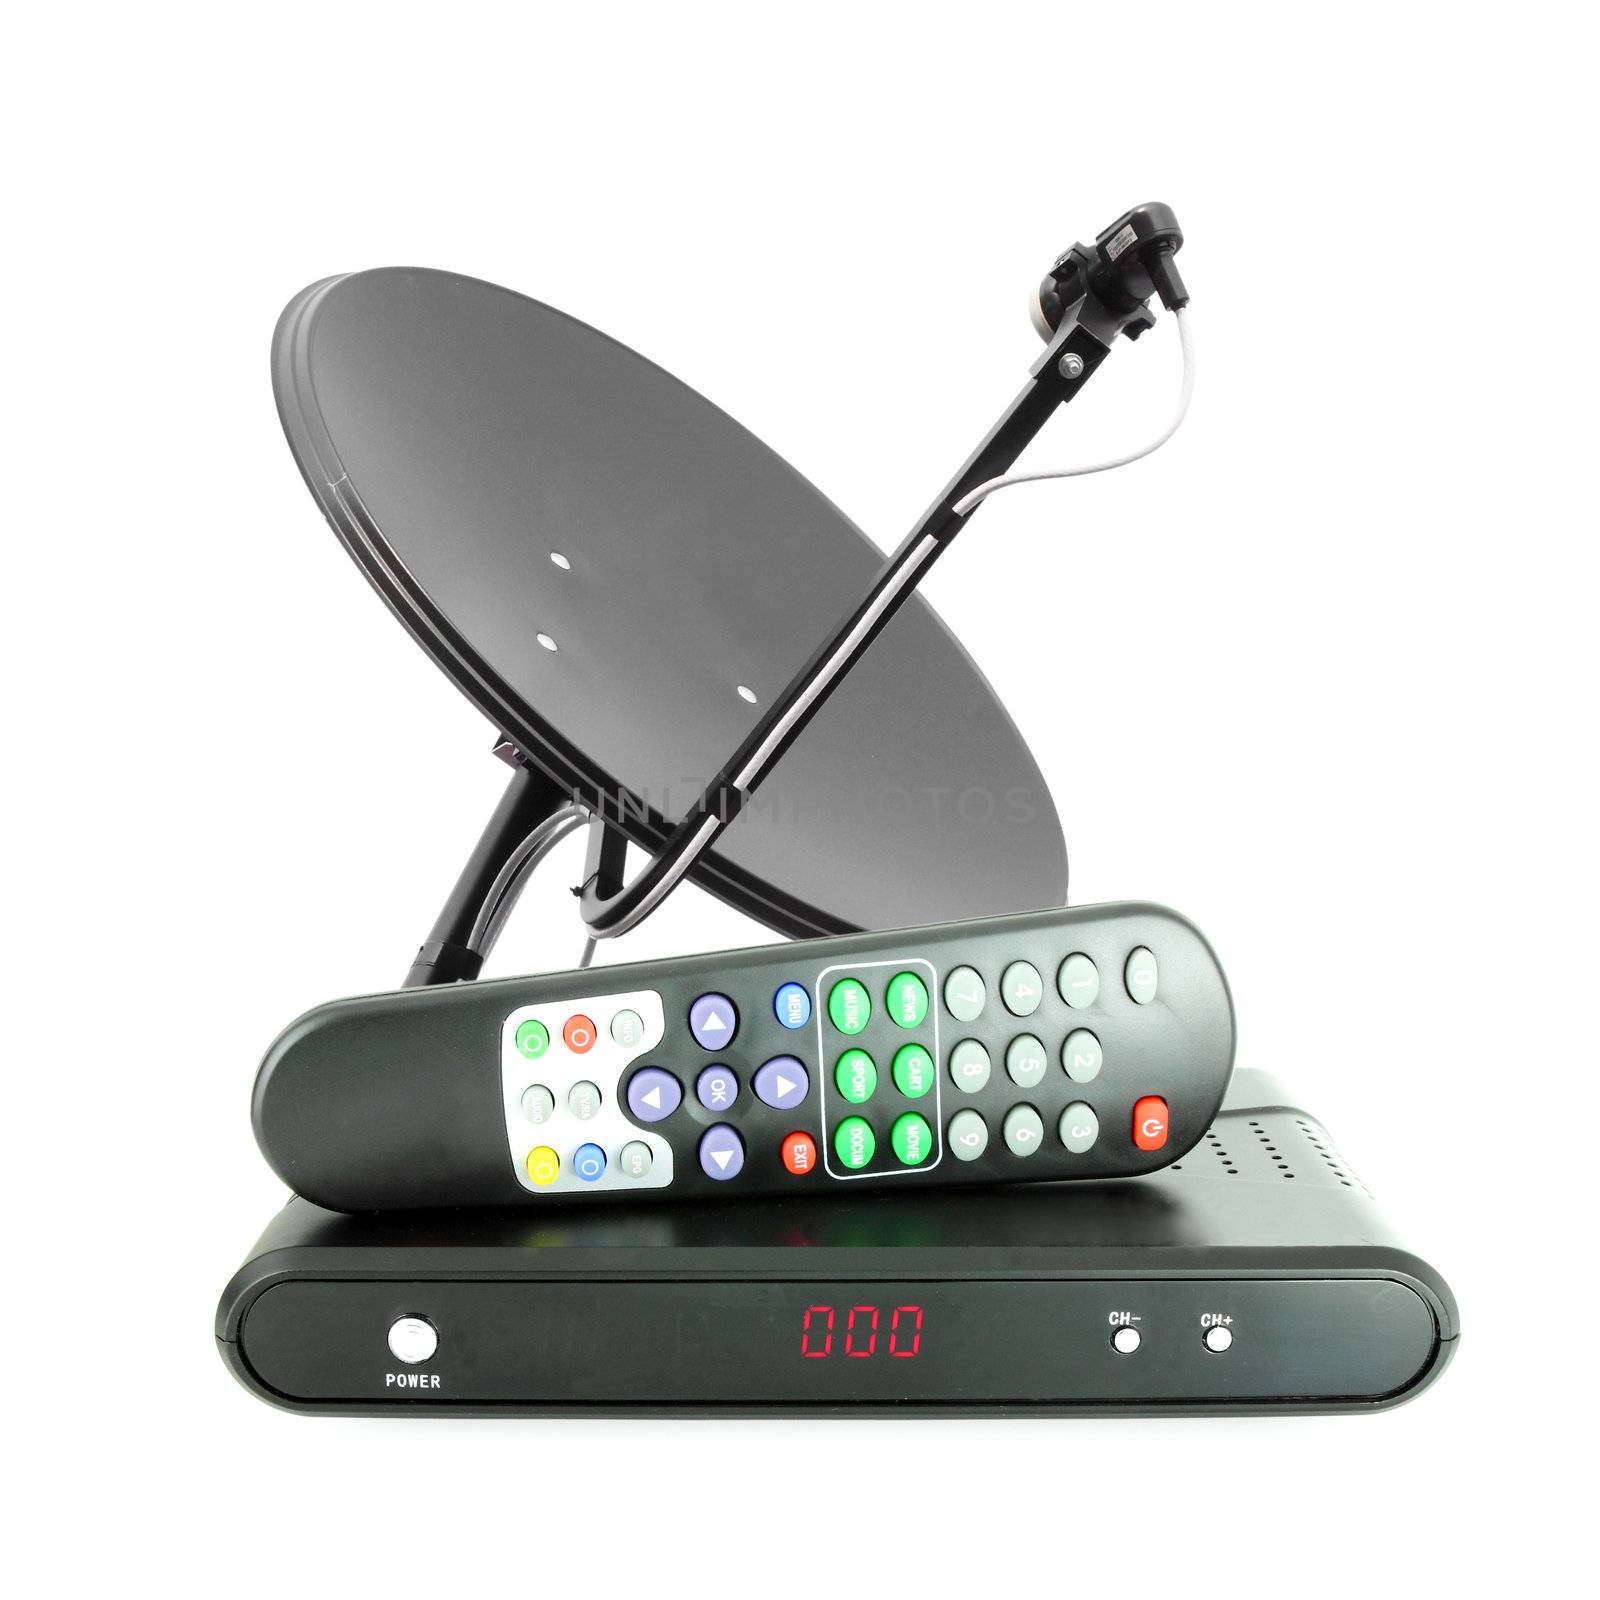 Set of receive box remote and dish antenna  by geargodz